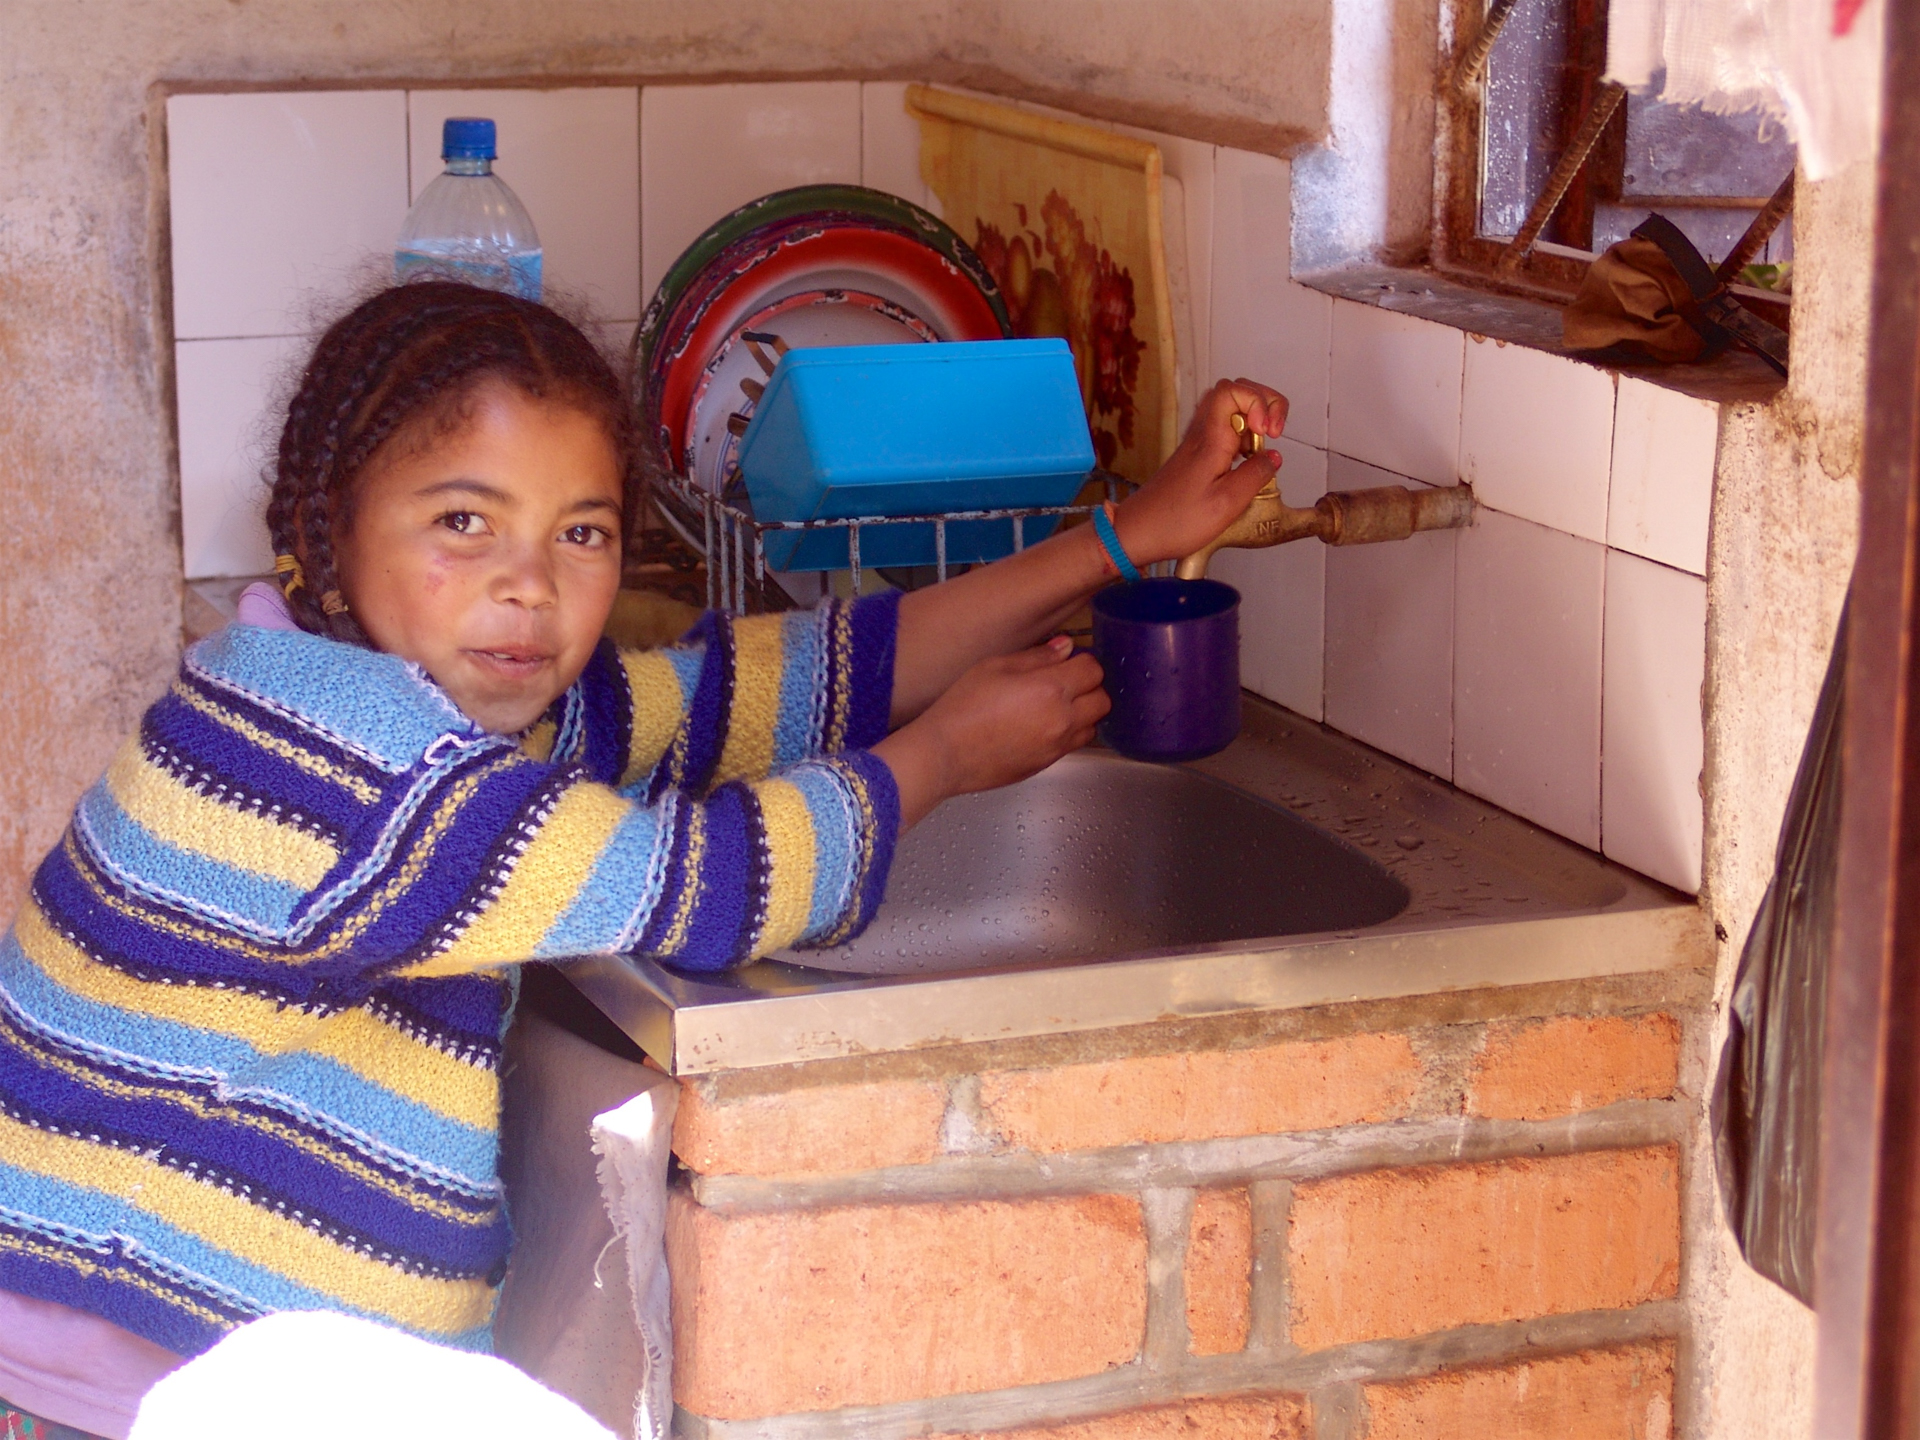 Young girl seeing clean water on tap for the first time